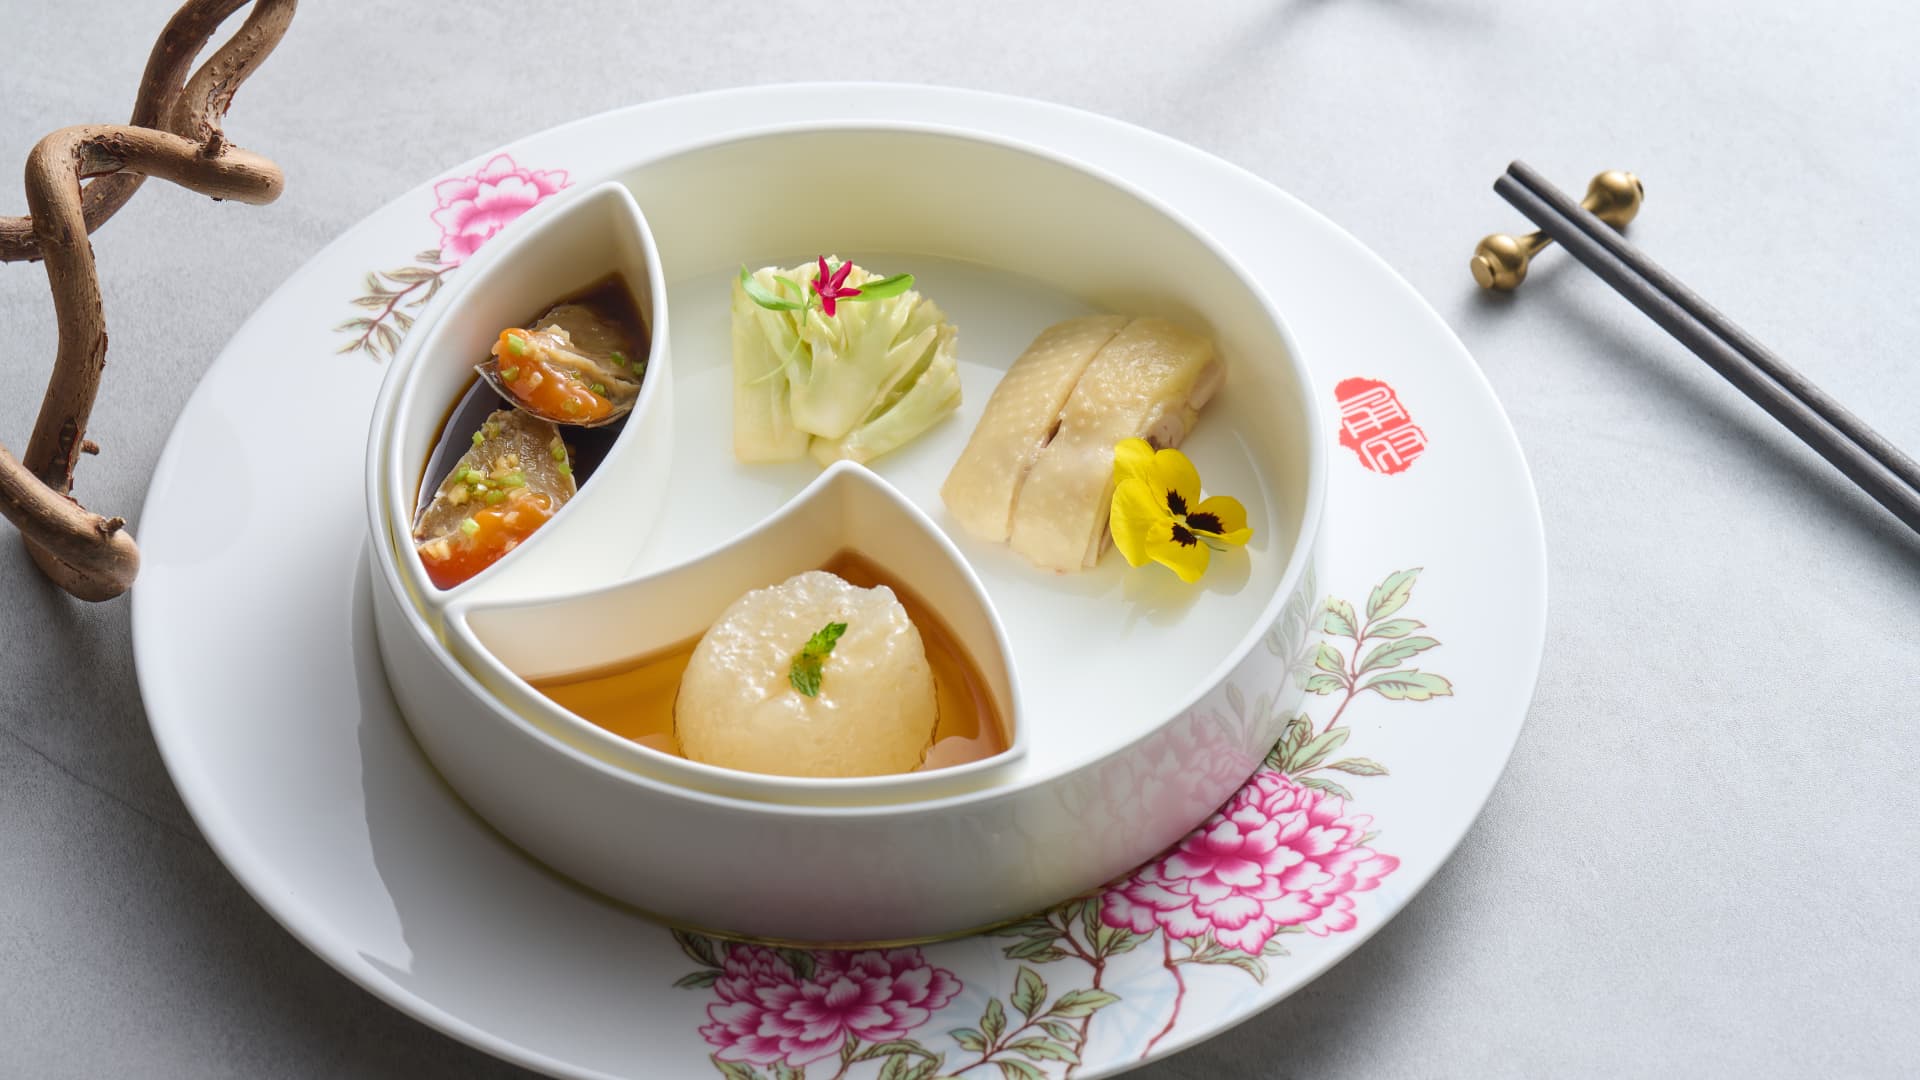 A dish from Hong Kong's Yong Fu. Hong Kong leads the 51-100 list with eight places.